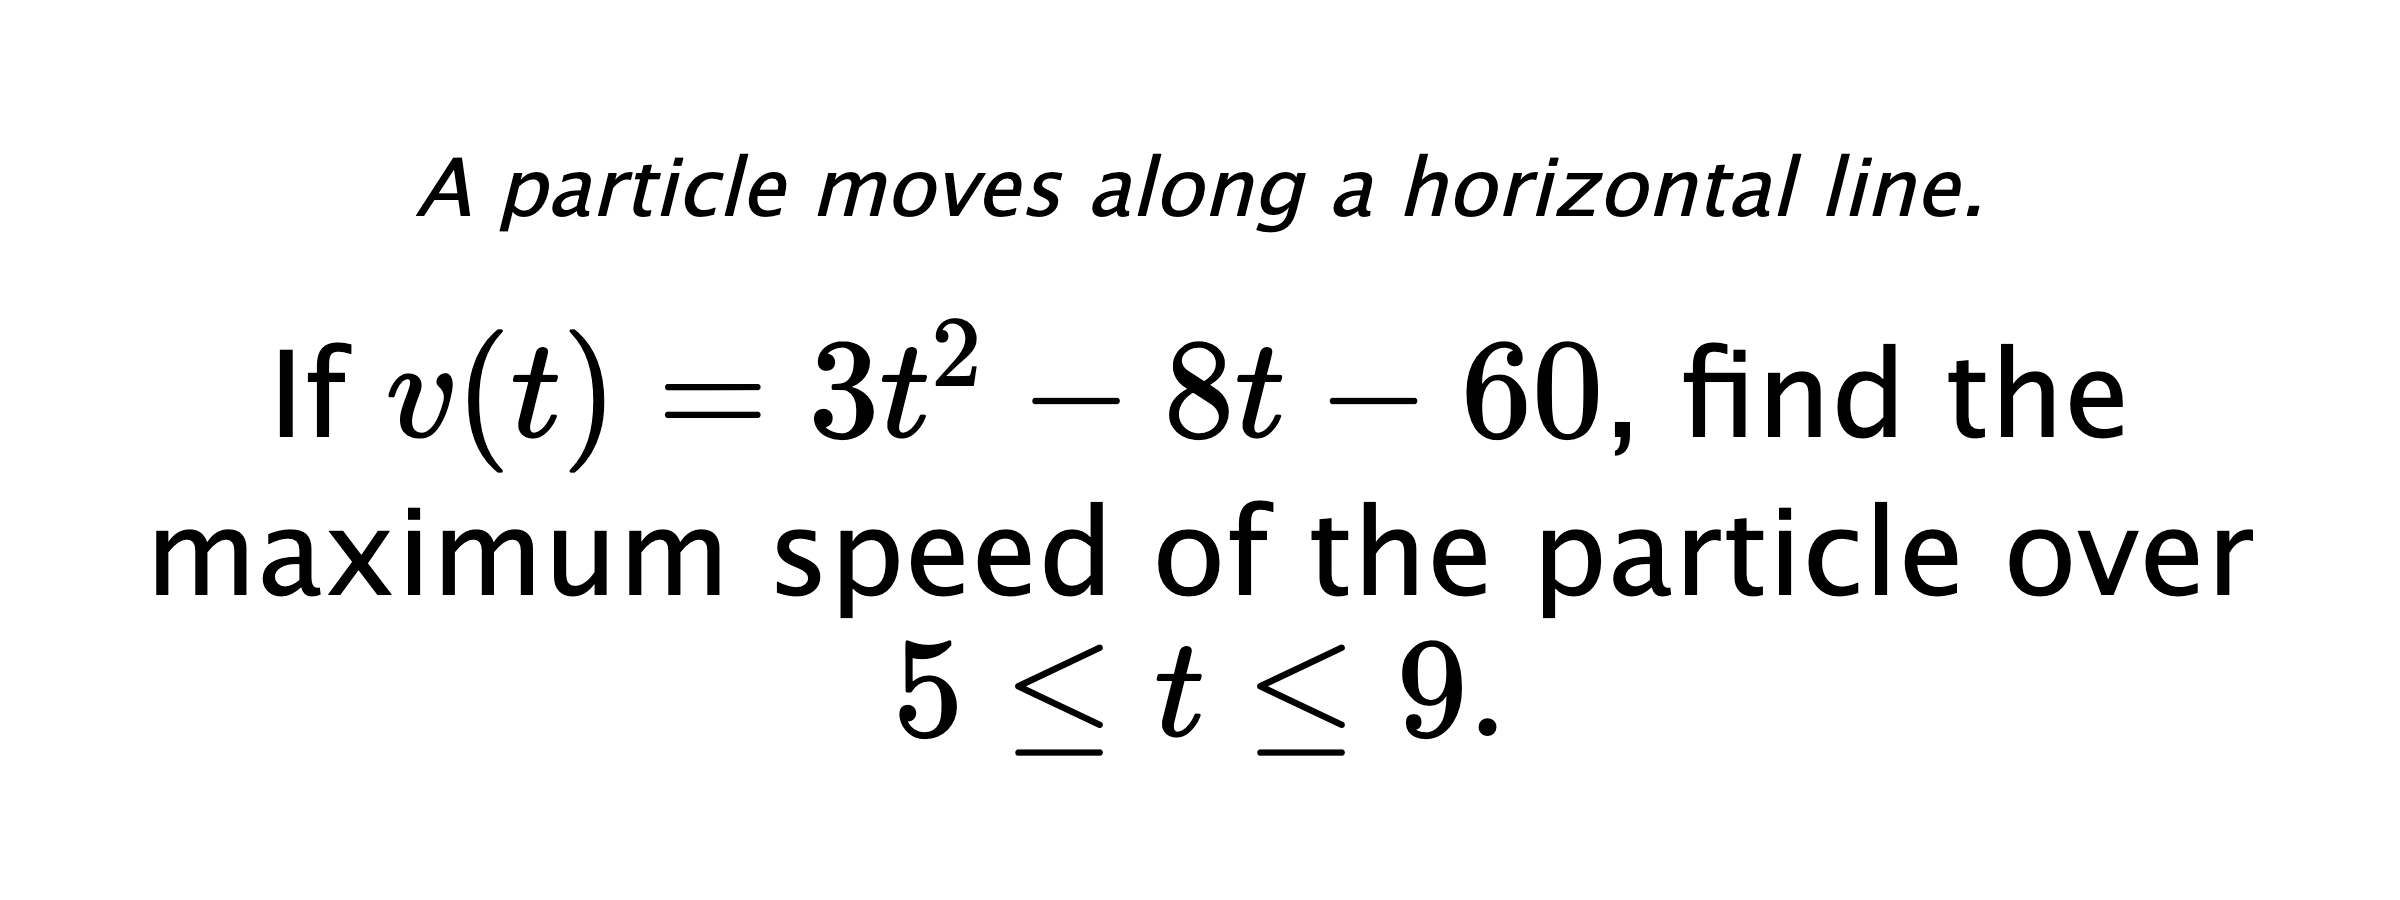 A particle moves along a horizontal line. If $ v(t)=3t^2-8t-60 $, find the maximum speed of the particle over $ 5 \leq t \leq 9. $